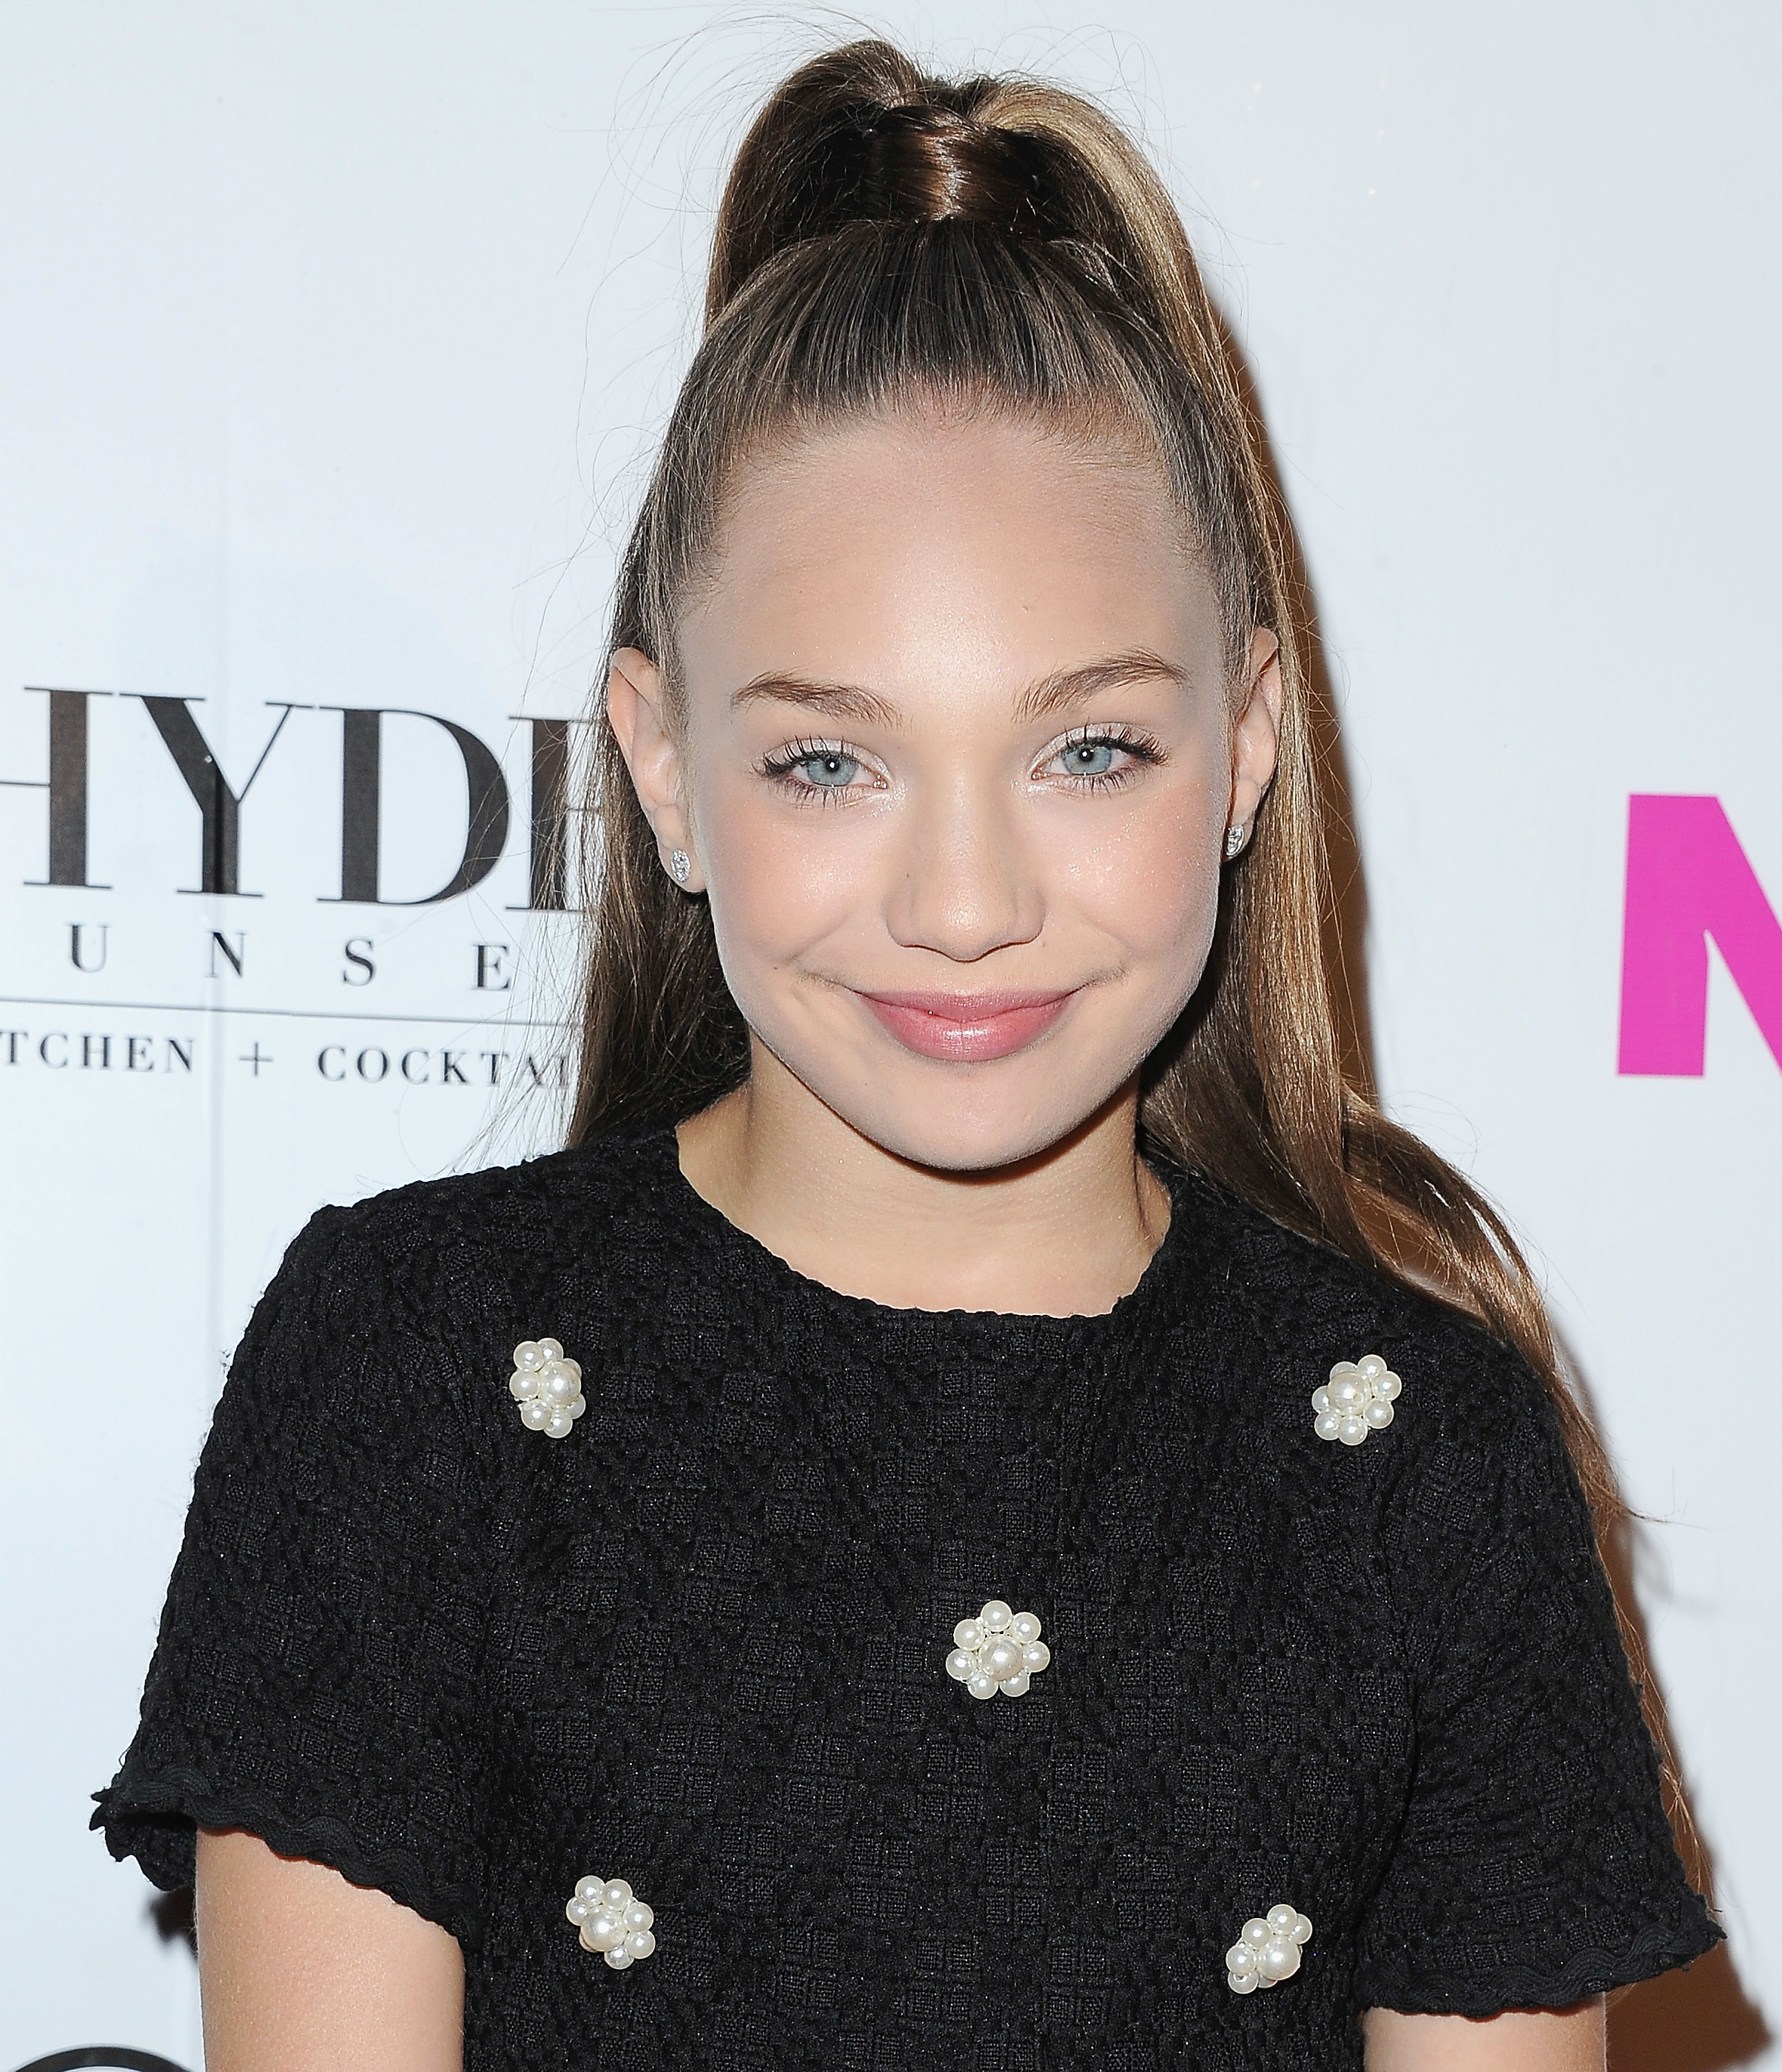 Close-up of Maddie at a media event